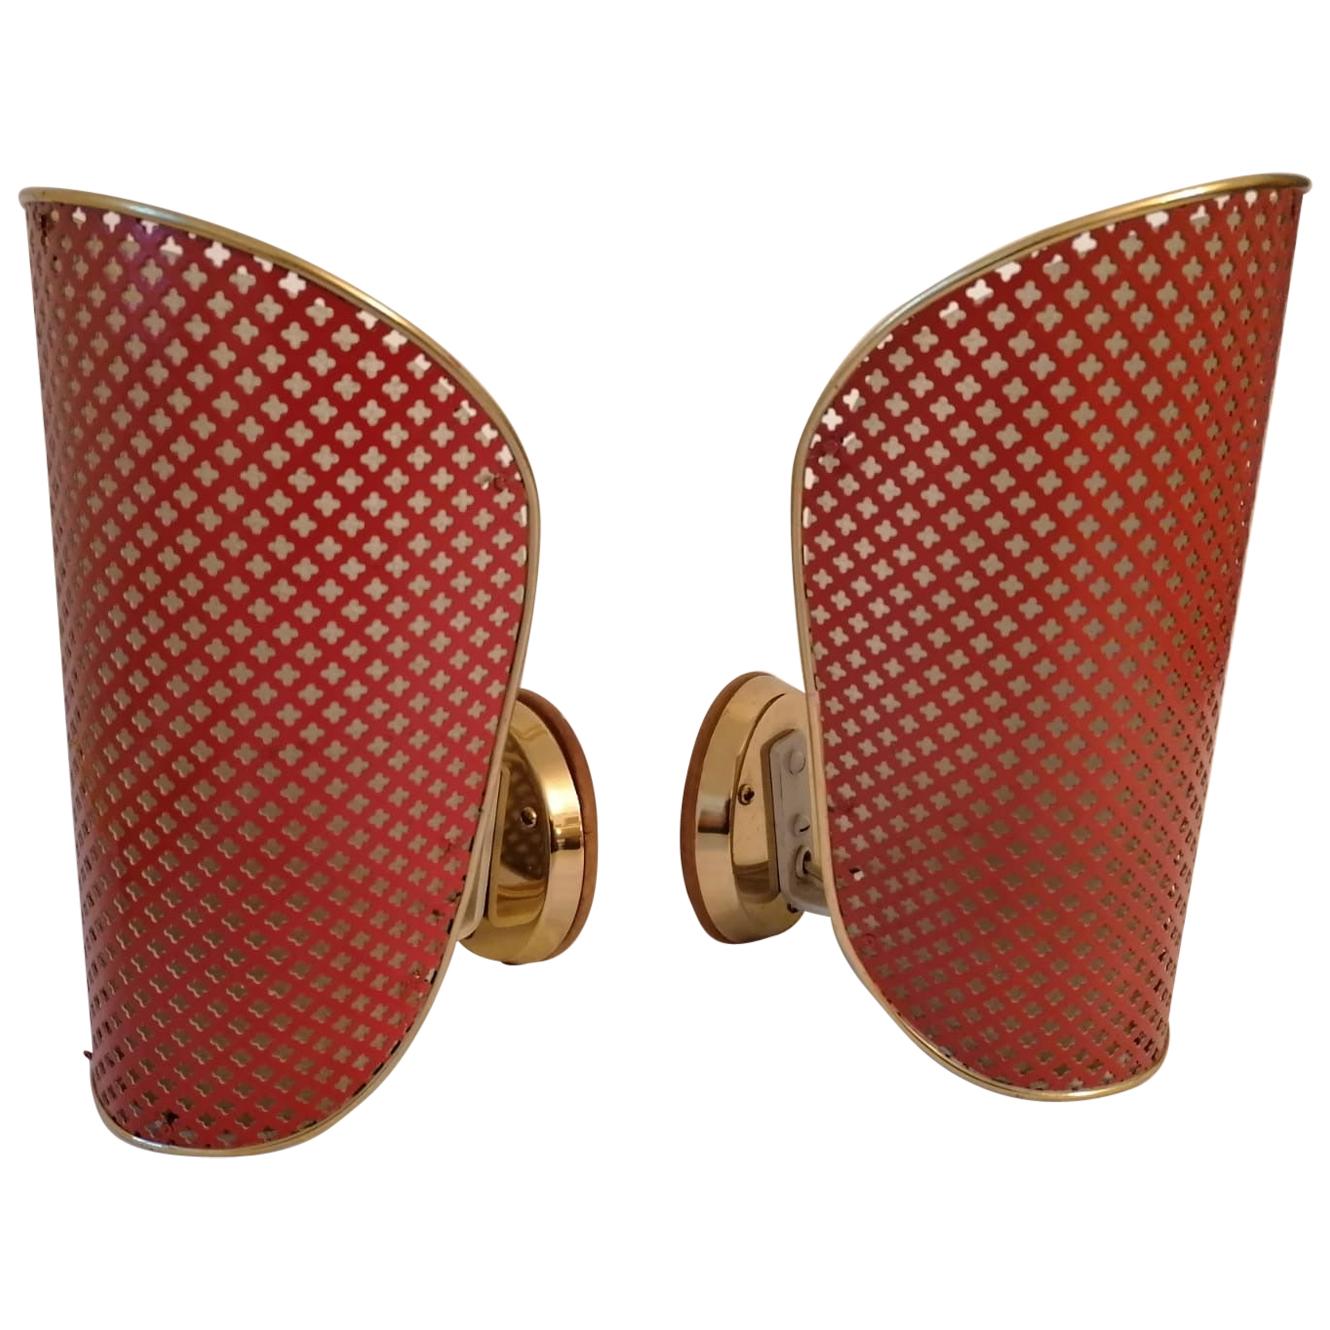 Pair of Red Midcentury Wall Lamps Attributed to Rupert Nikoll For Sale